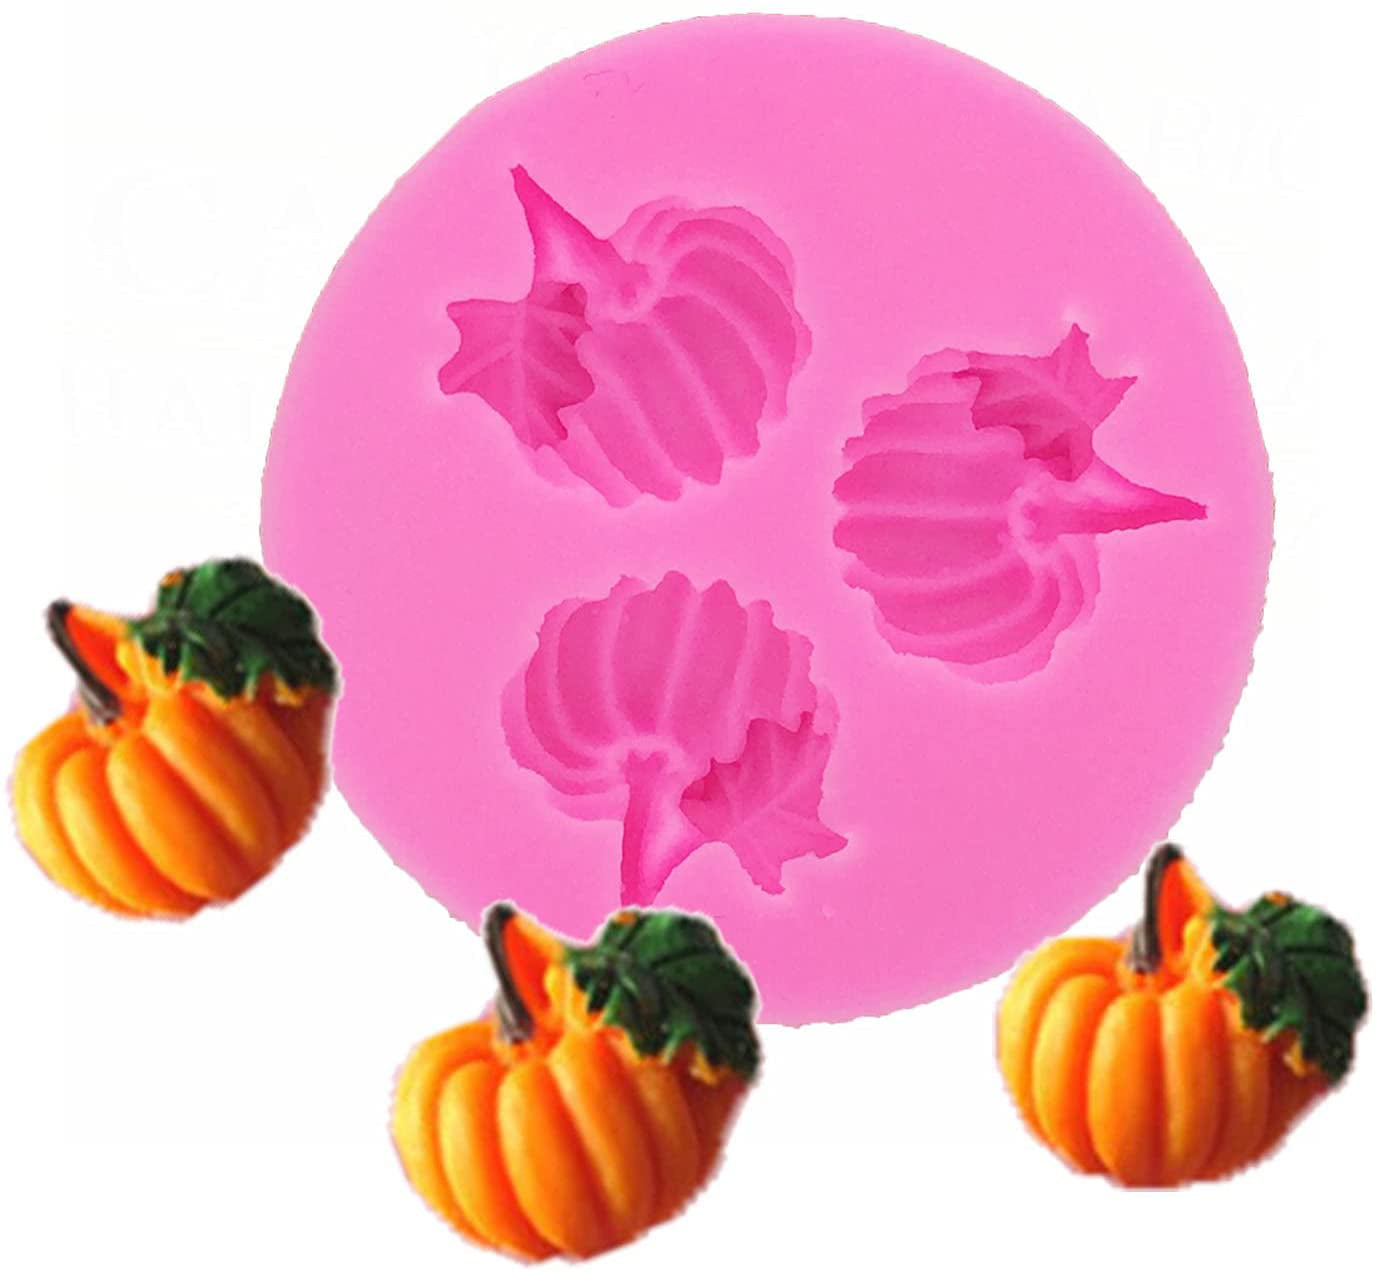 Chocolate Ice Cube TheStriven 3D Pumpkin Silicone Mold Halloween Motif DIY Fondant Candy Mould Silicone Moulds for Halloween Chocolate Perfect to Make Pudding Cupcakes